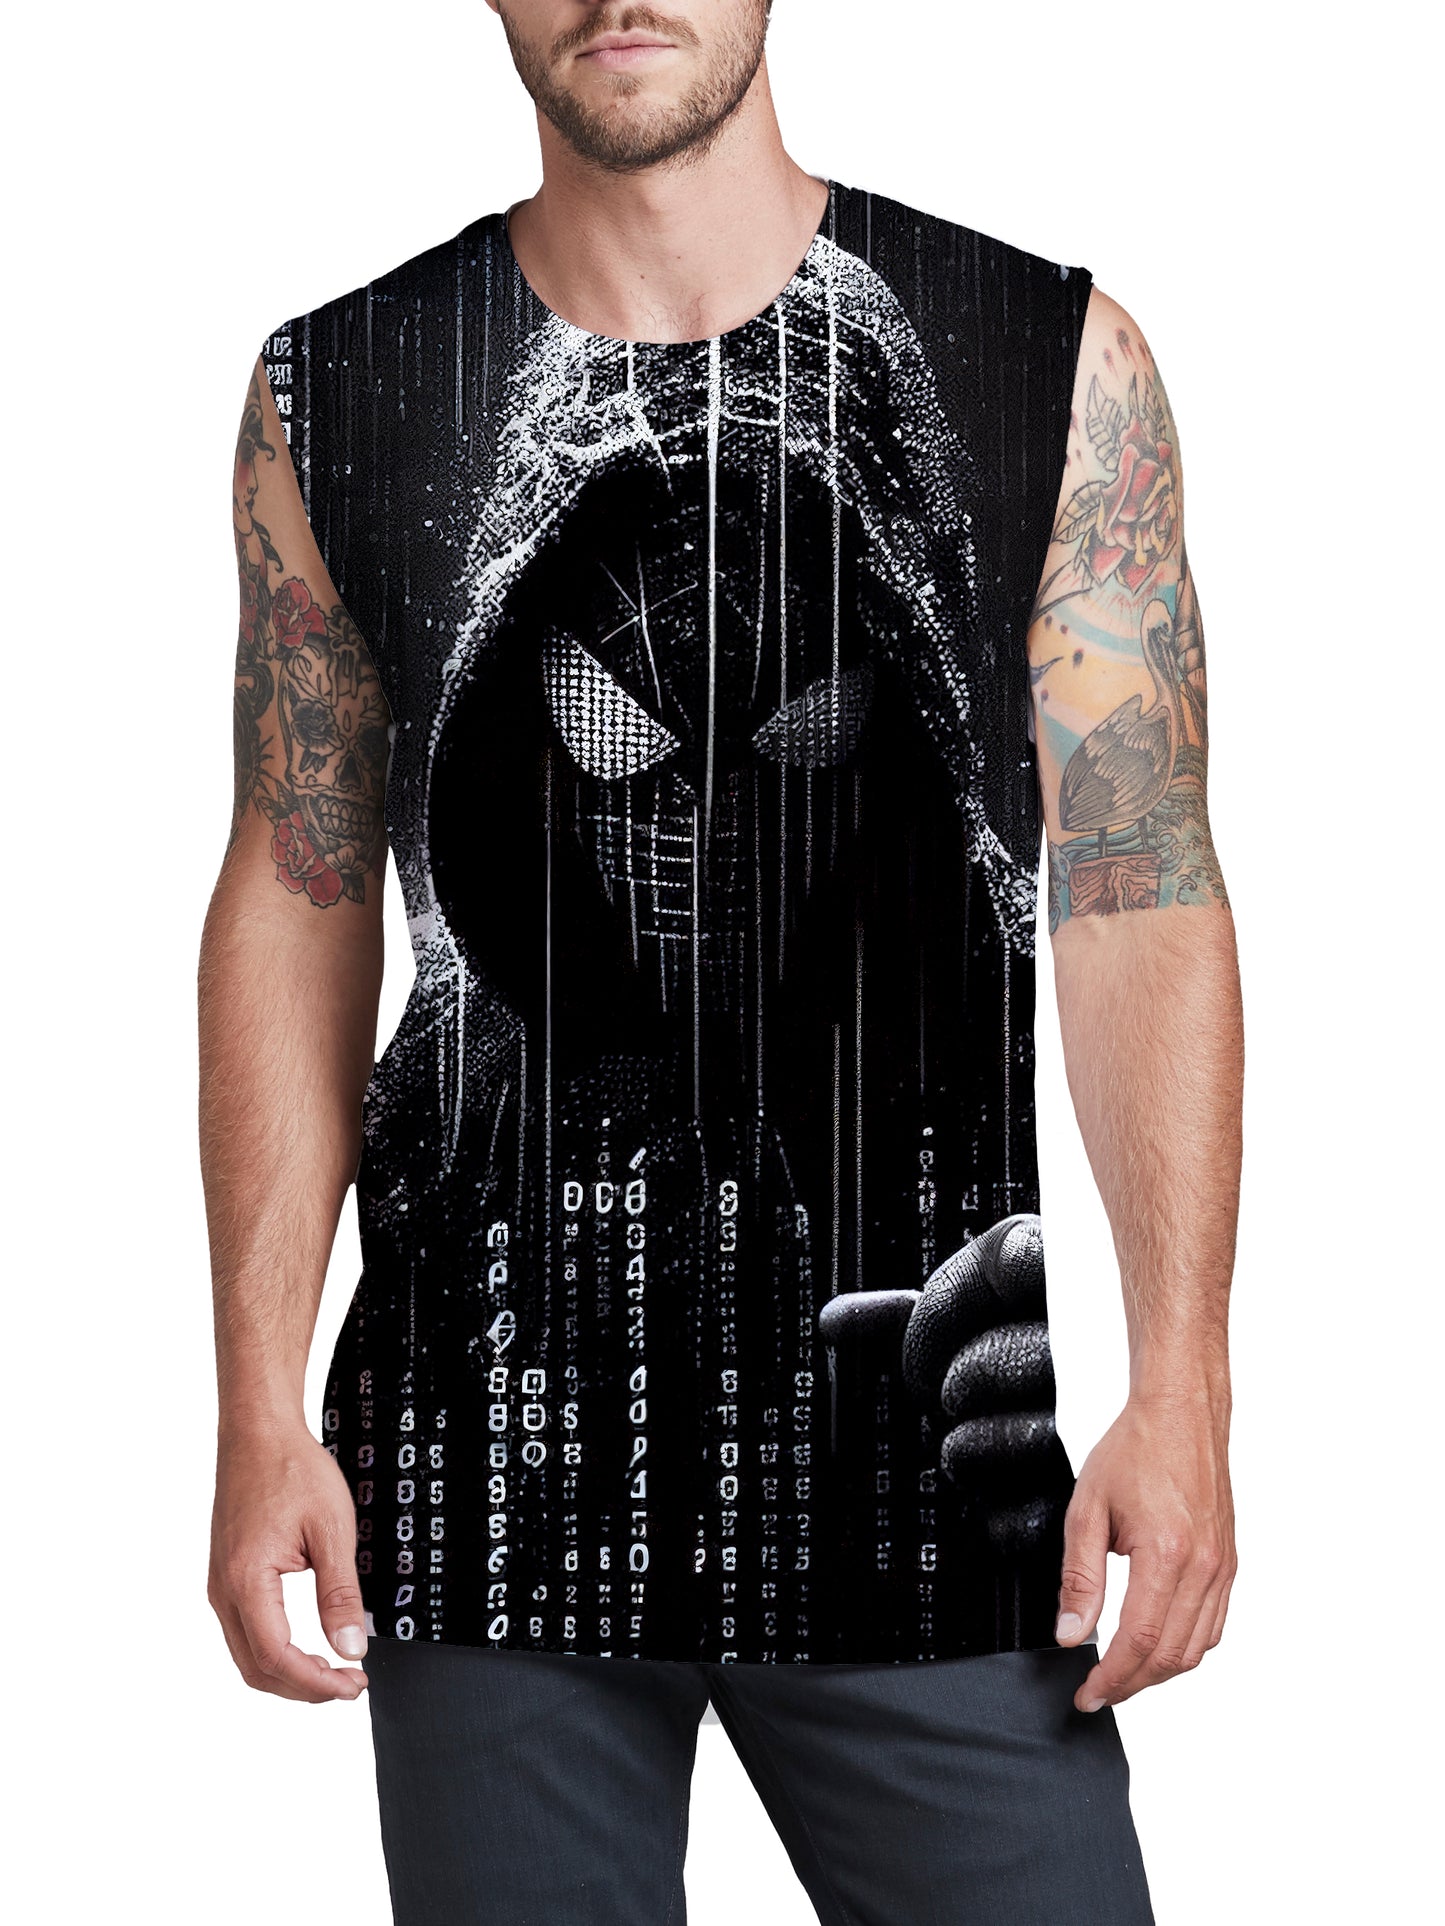 Spidey Existence Men's Muscle Tank, iEDM, | iEDM